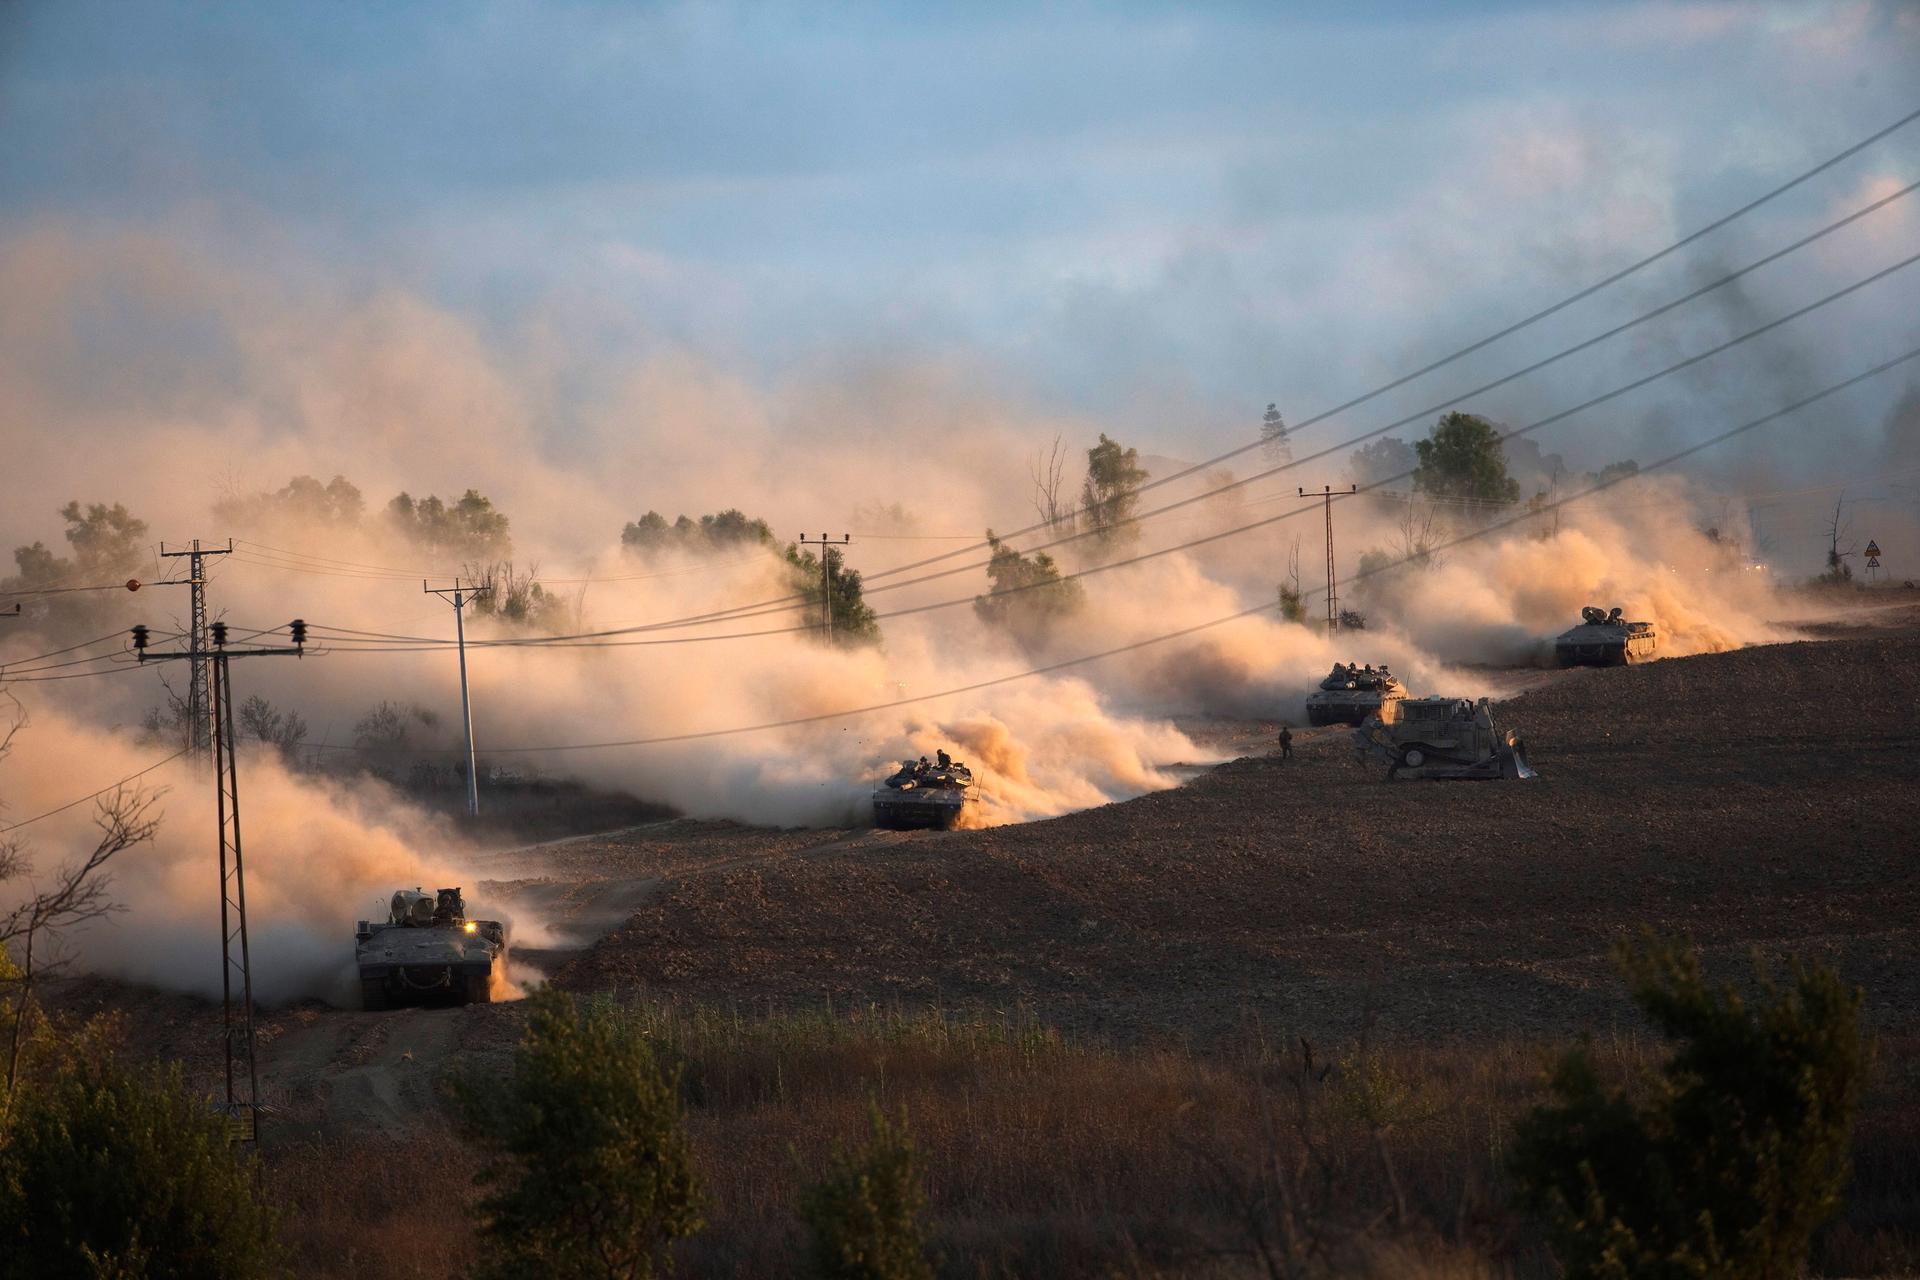 Israeli tanks maneuver outside the northern Gaza Strip on July 18, 2014. Israel intensified its land offensive in Gaza with artillery, tanks and gunboats on Friday and warned it could "significantly widen" an operation Palestinian officials said was killi